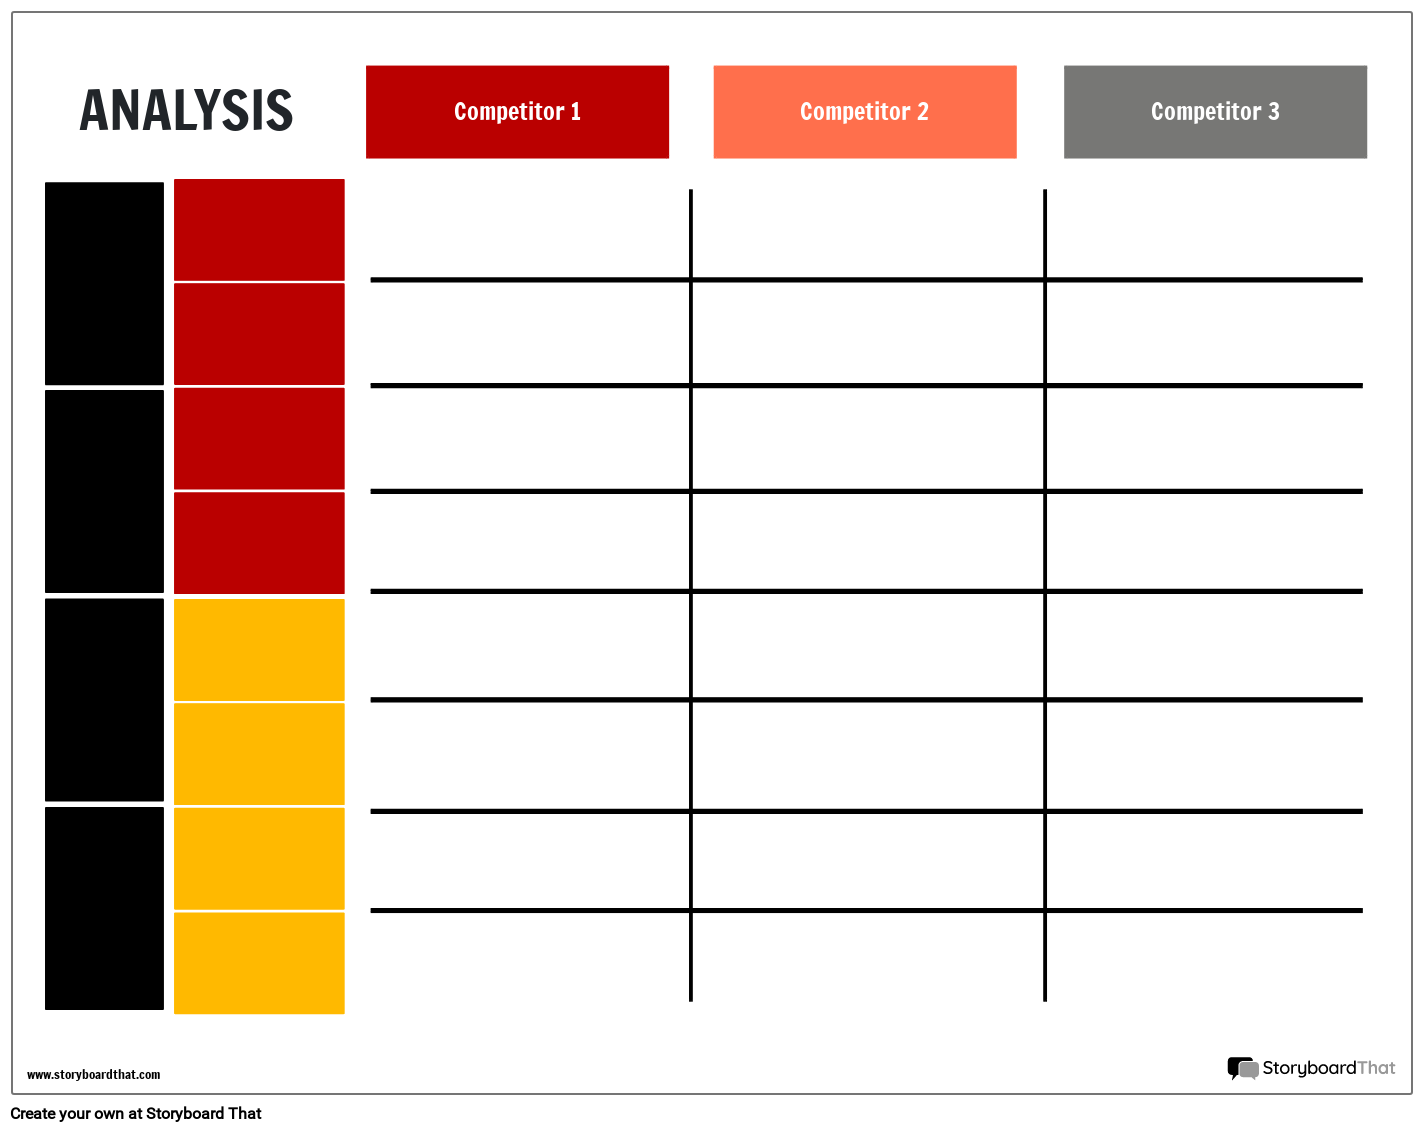 Competitive Analysis 3 Storyboard by templates